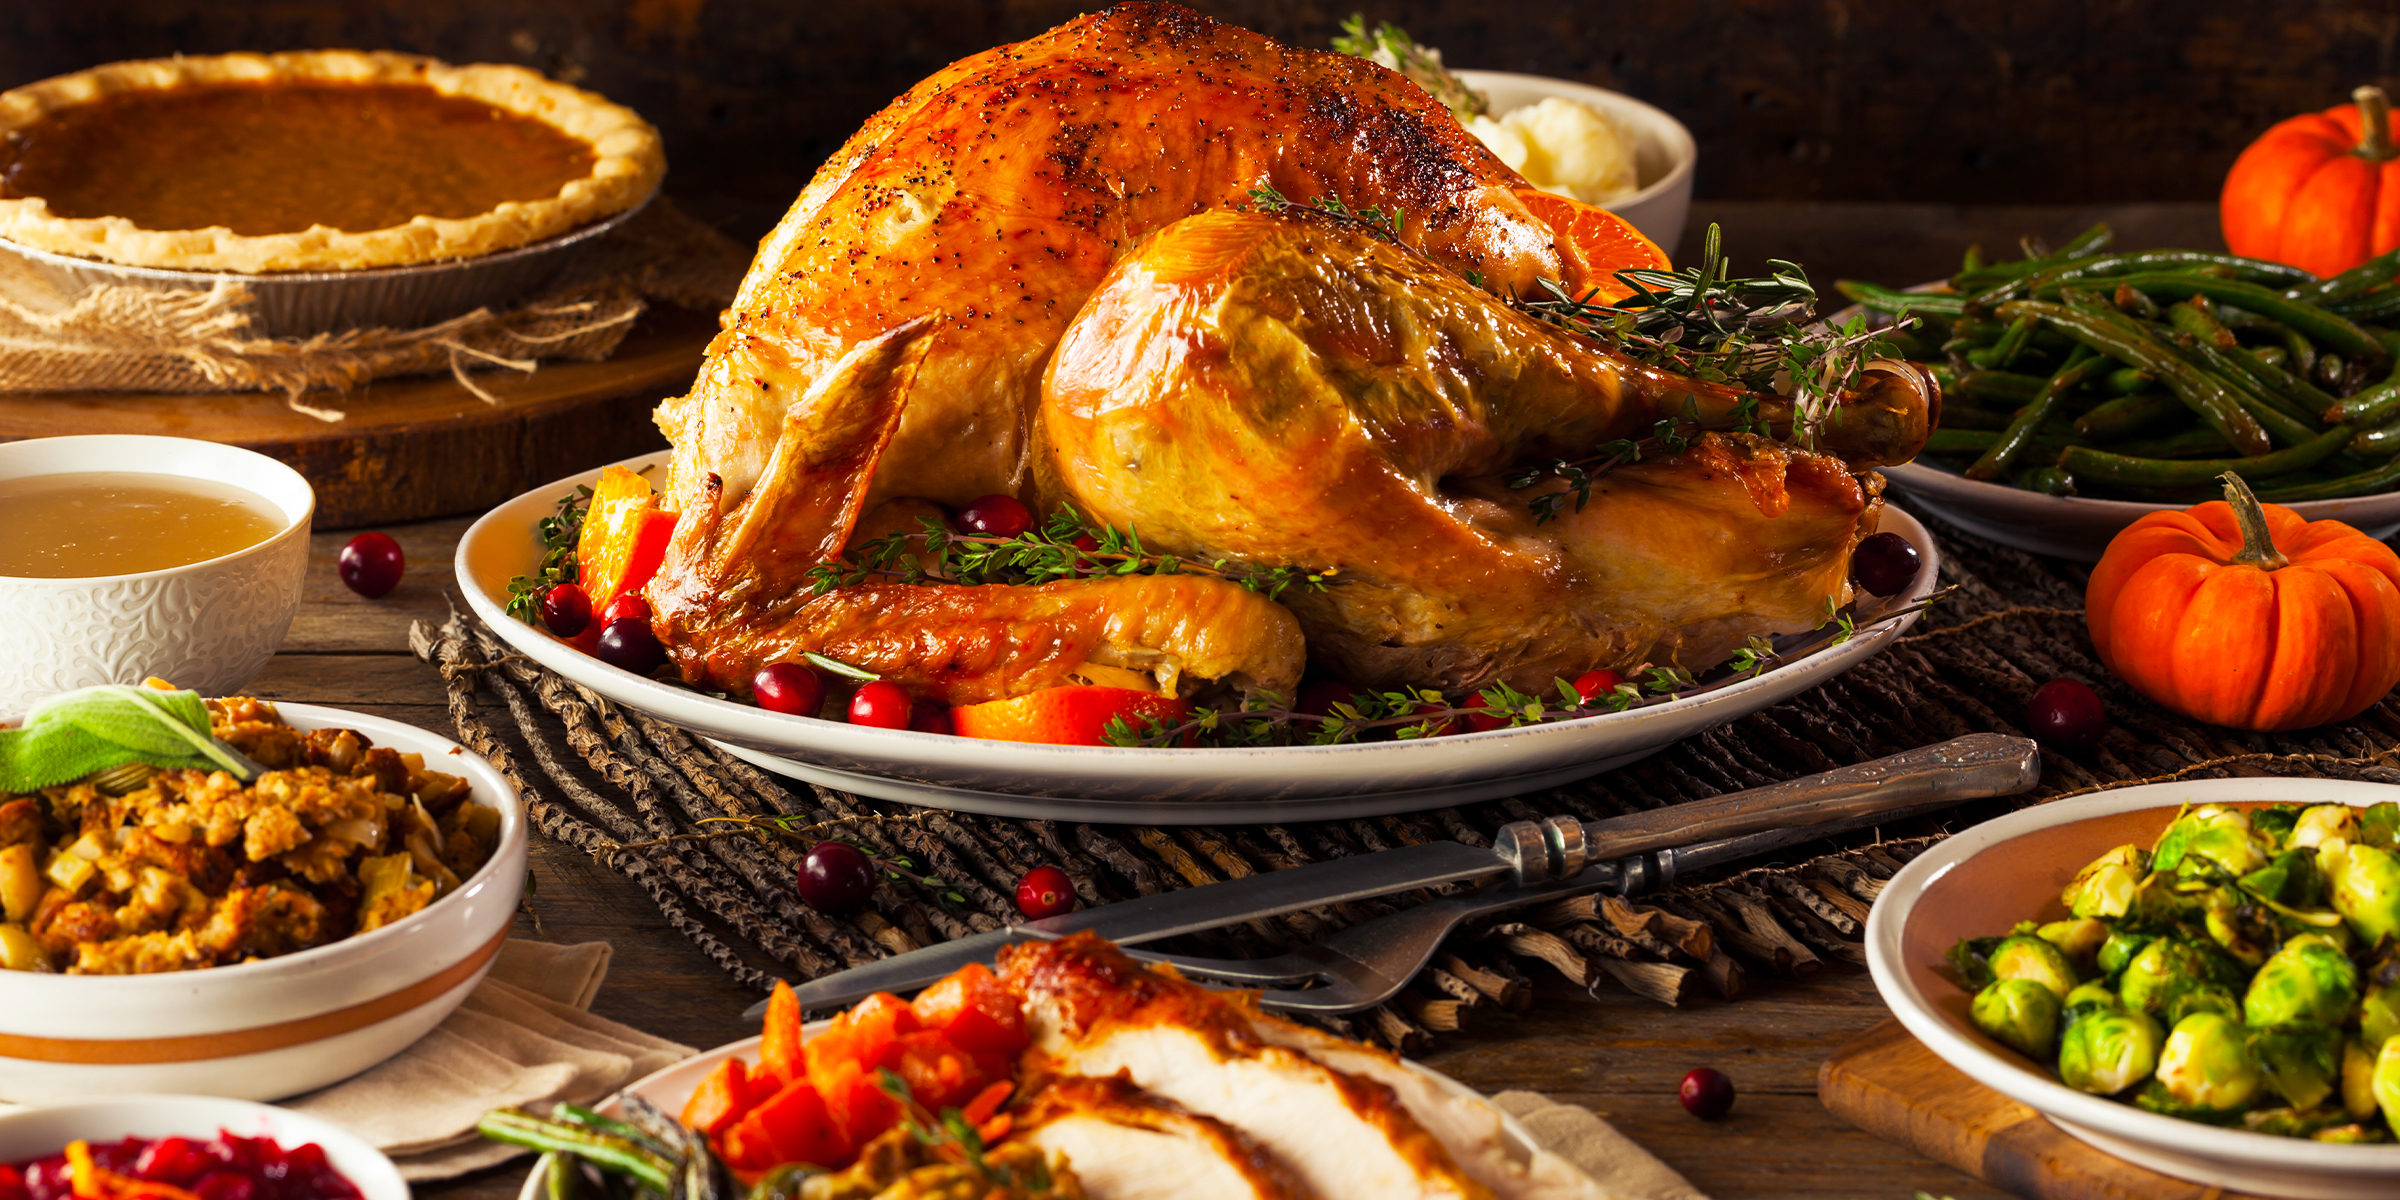 Homemade roasted Thanksgiving turkey with side dishes | Source: Shutterstock